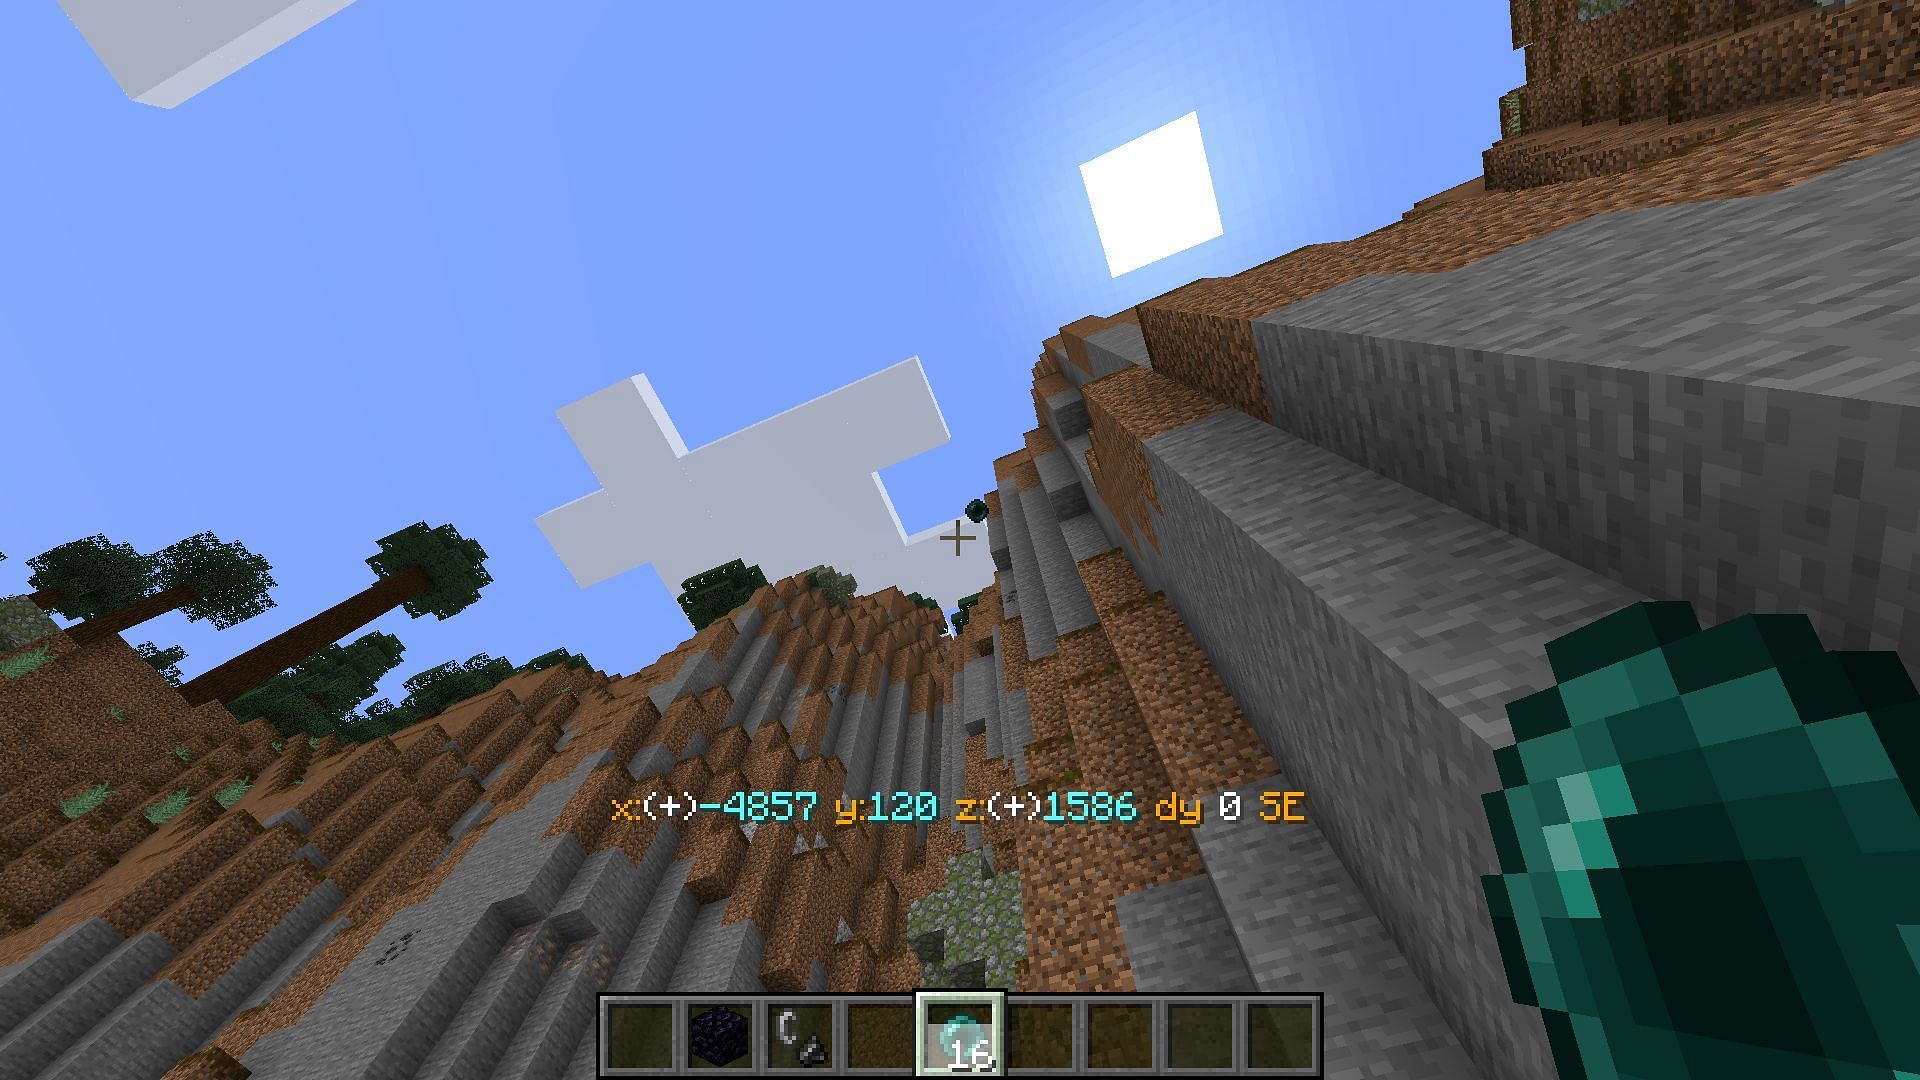 While falling, quickly throw ender pearl to avoid fall damage in Minecraft 1.19 (Image via Mojang)